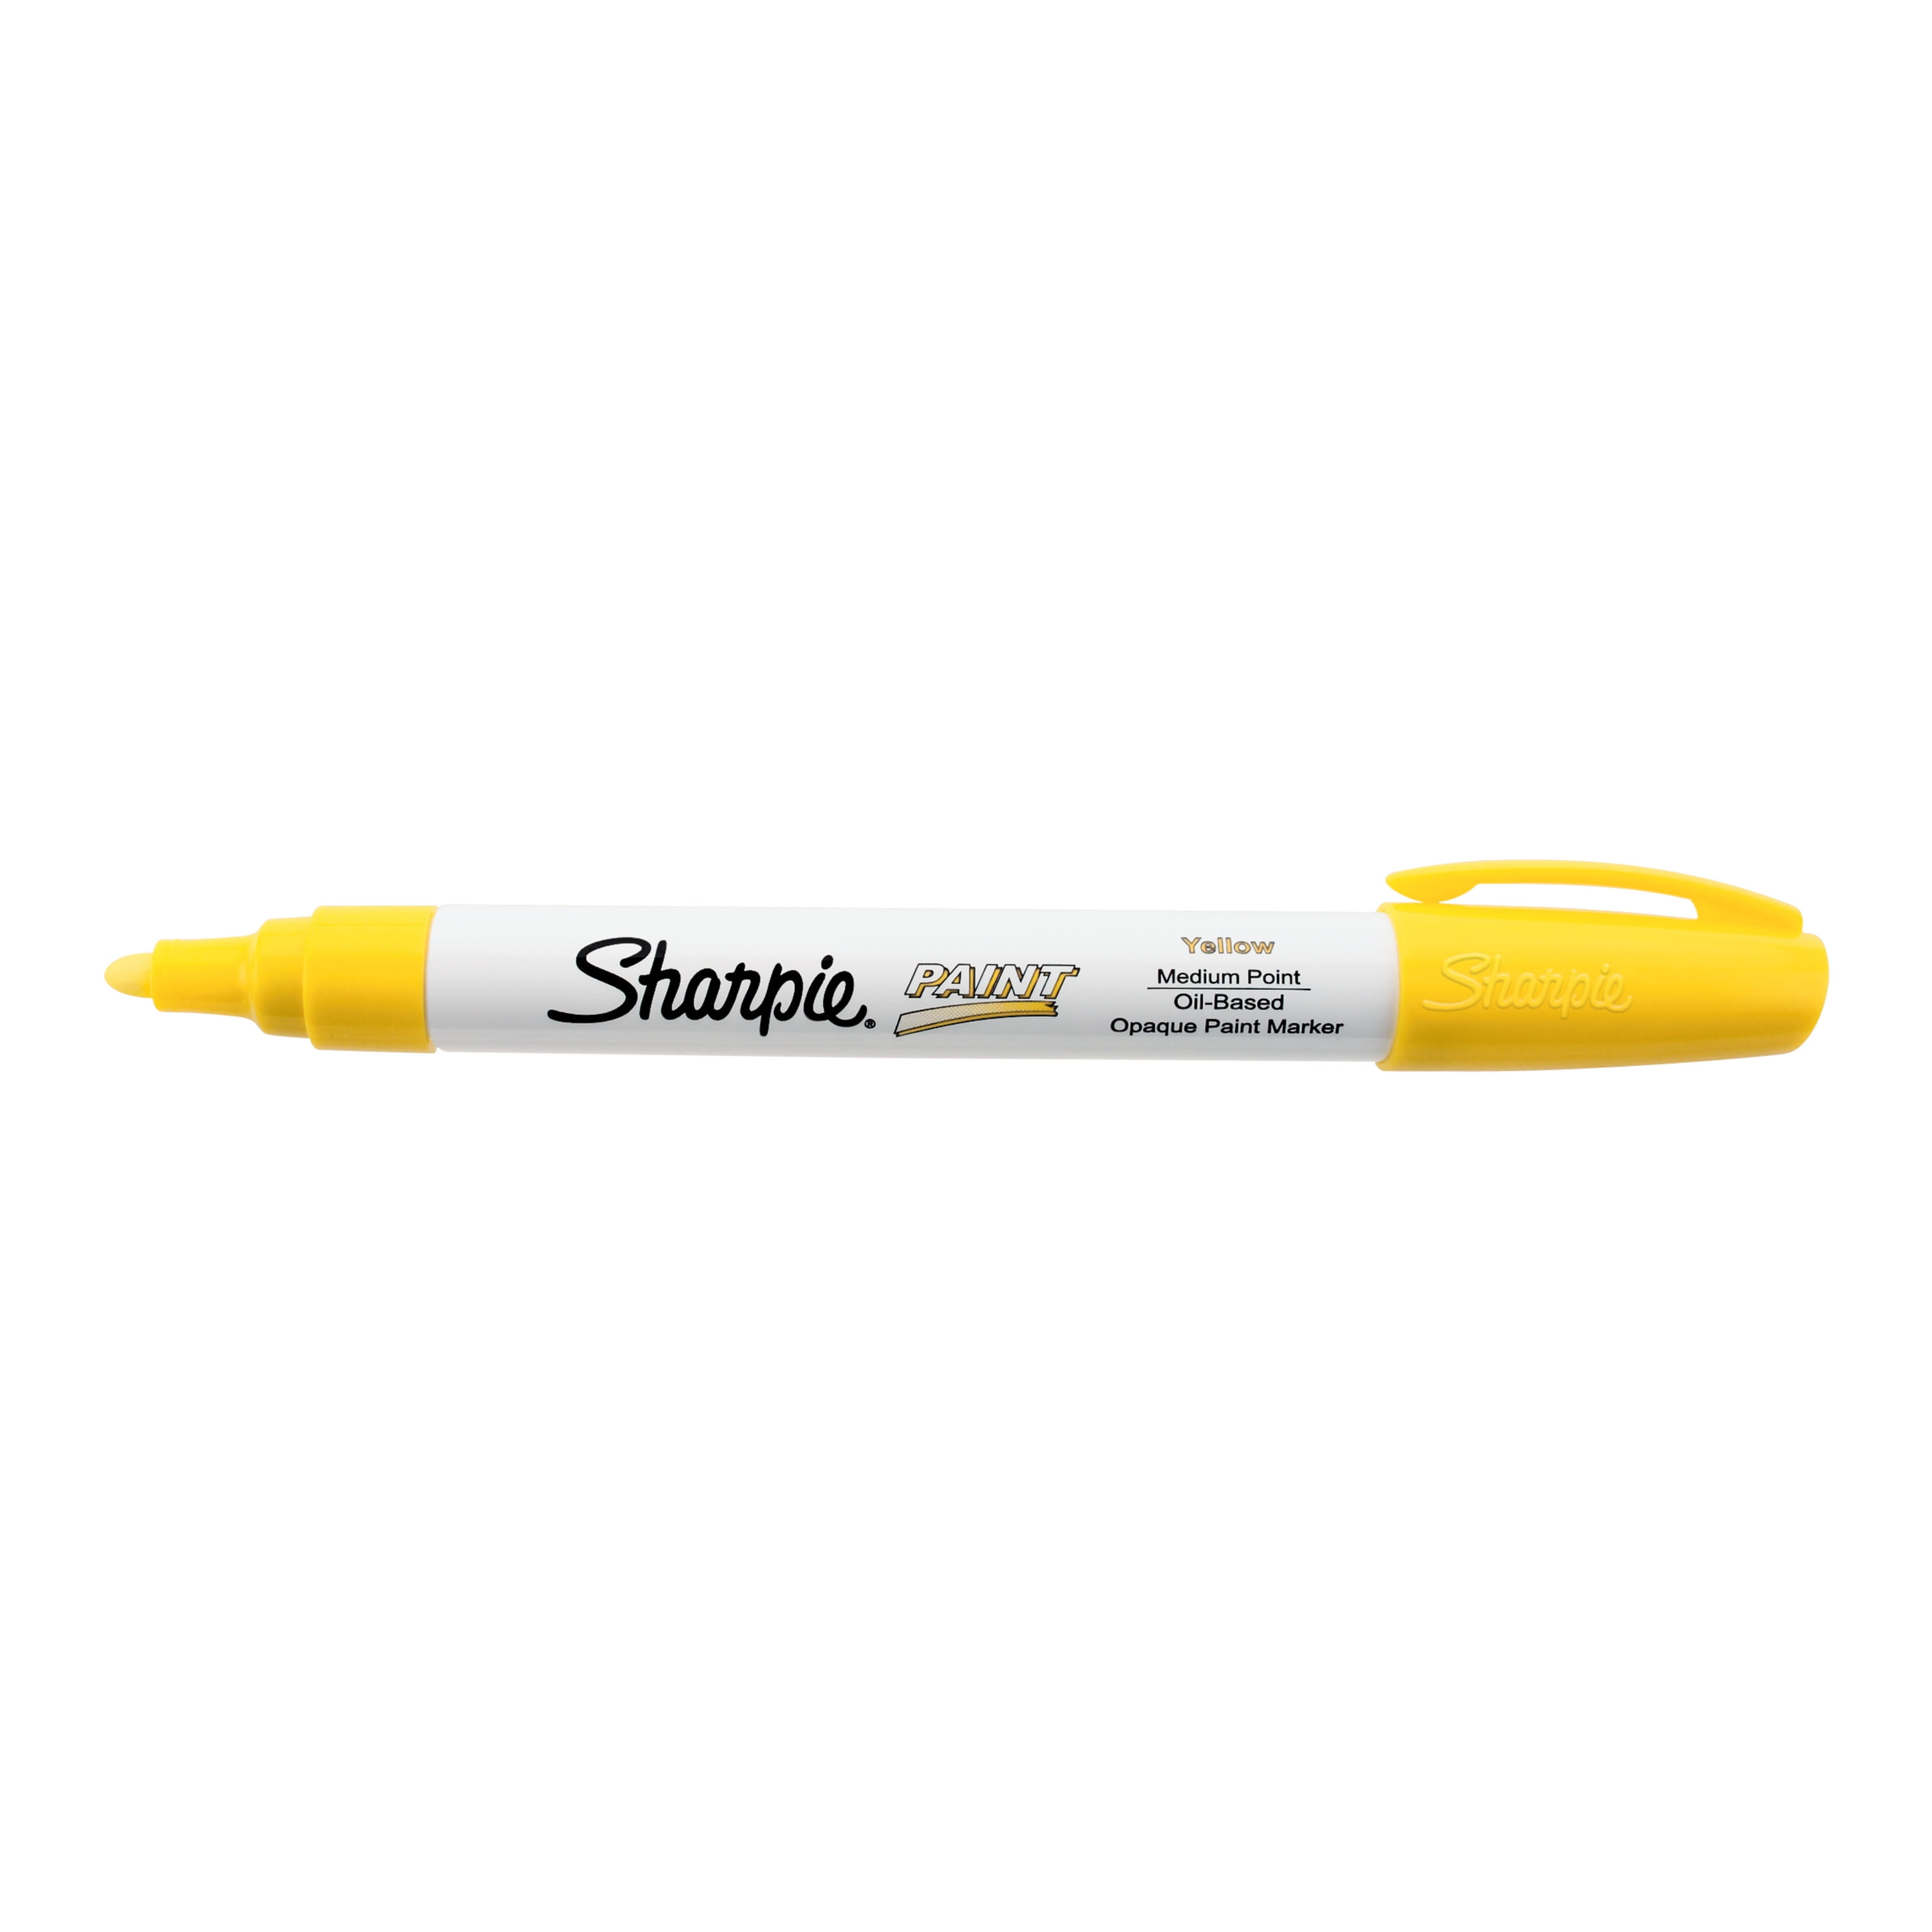 uni PAINT Yellow Oil-Based Paint Marker, 1.8-2.2mm Medium Point Bullet Tip,  Permanent Smooth-Flowing Paint Dries Quickly and Withstands Water, Fading